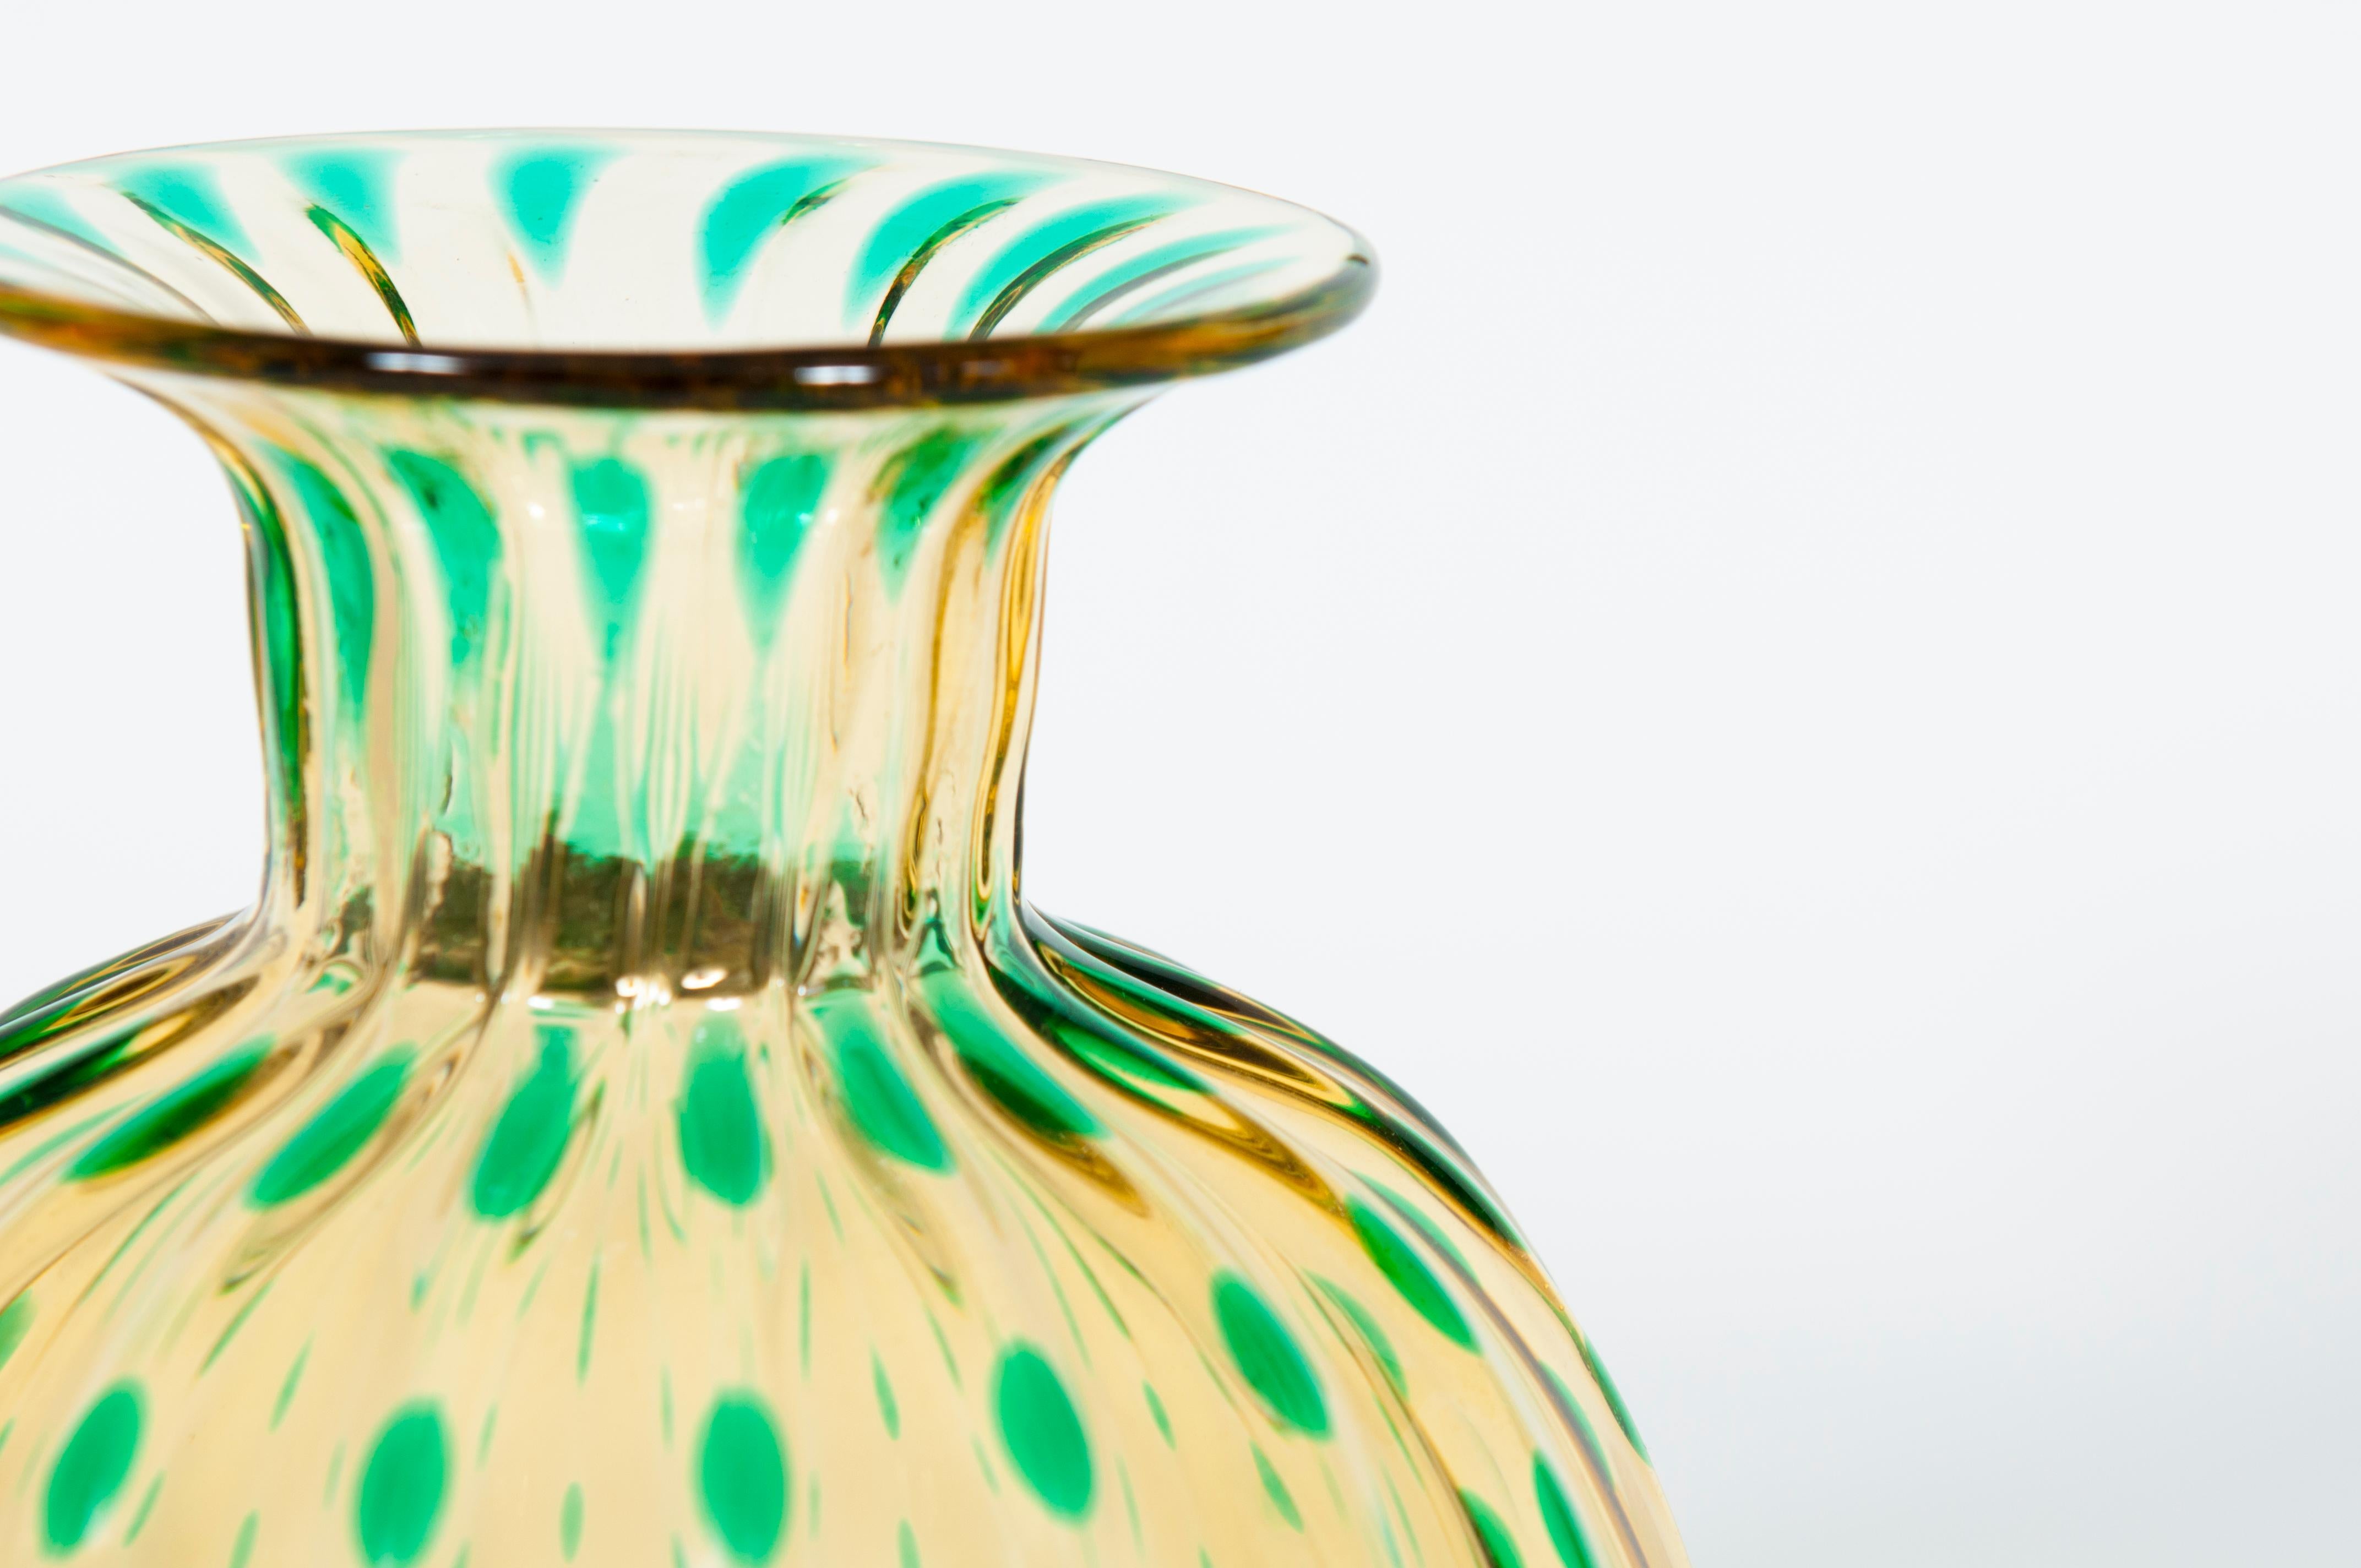 Hand-Crafted 20th Century Murano Glass Round Vase with Green Flecks, Attributed to Caramea